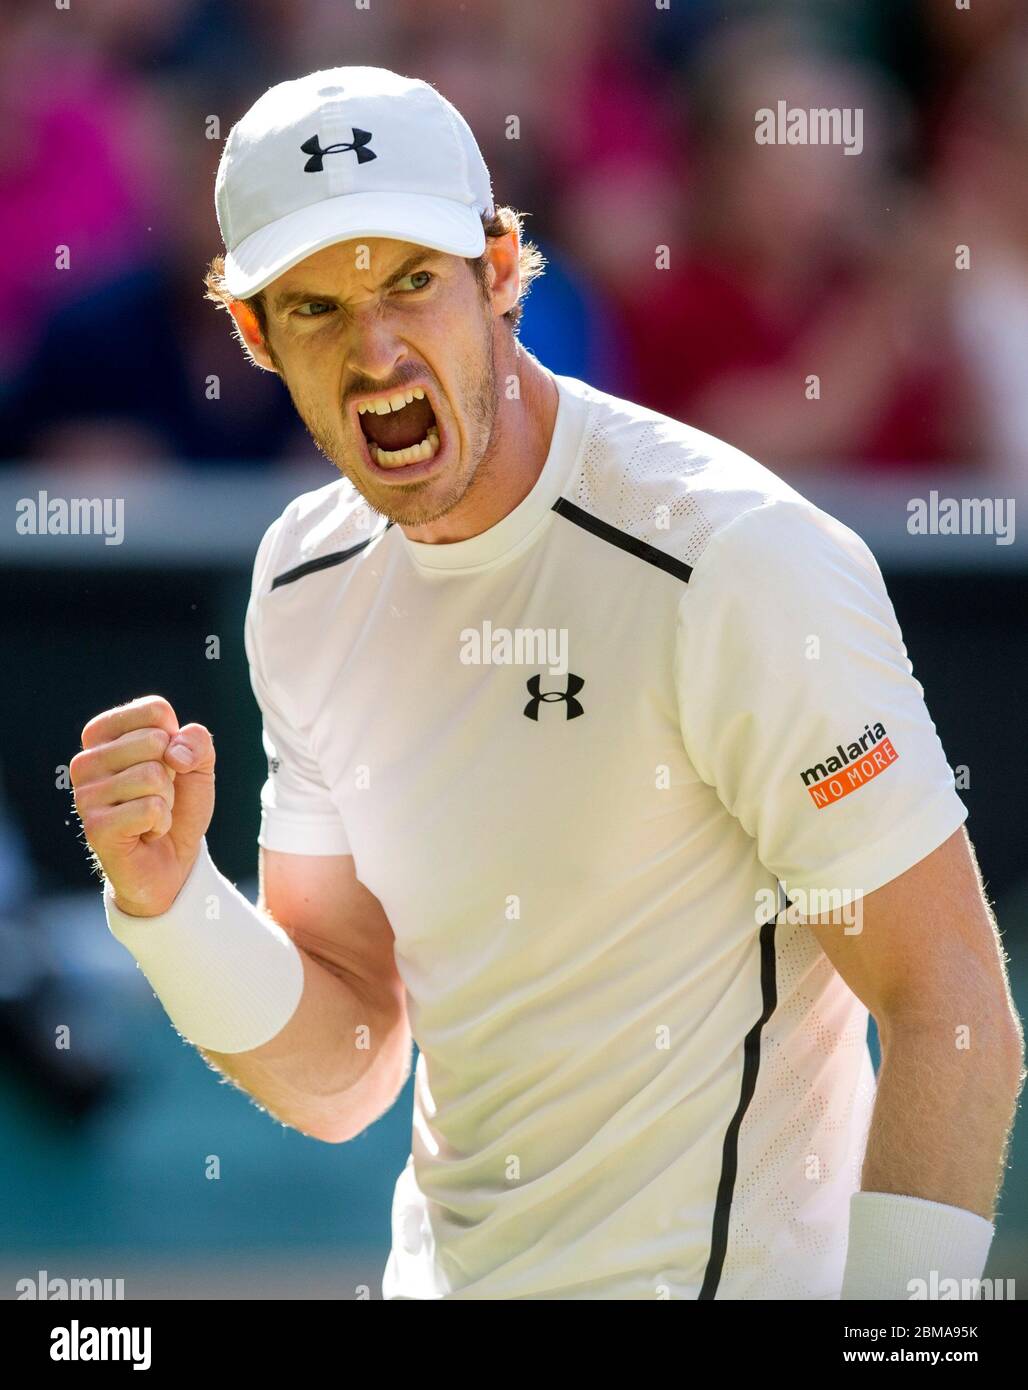 July 8th 2016, Wimbledon, London, Mens singles semi-final Tomas Berdych v Andy Murray. Andy Murray shouts out during the match on Centre Court. Stock Photo